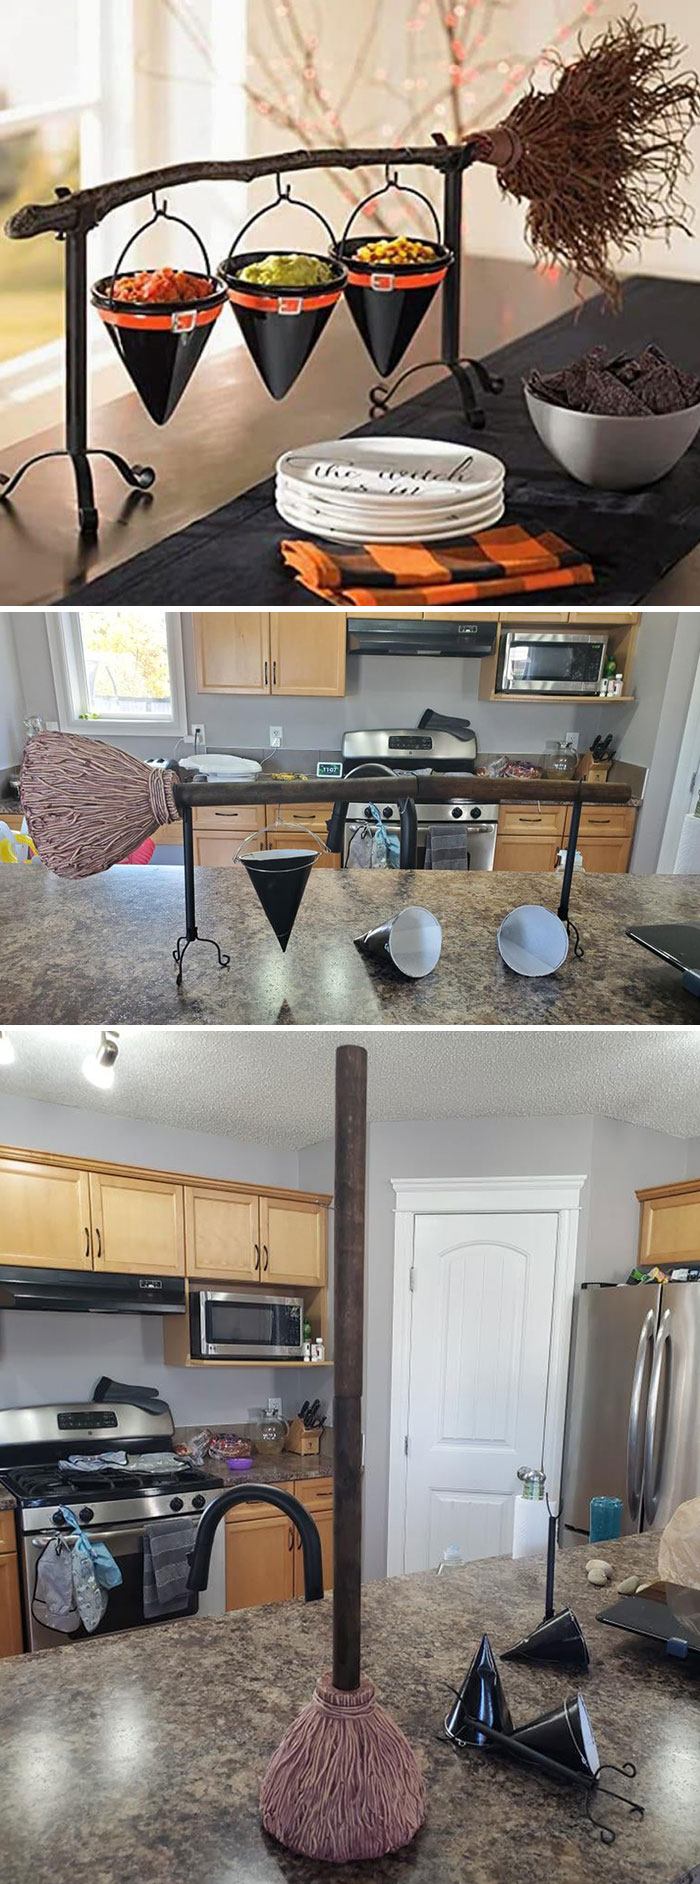 Sister Ordered The First Photo Off Amazon. The Snack Cups Were Labeled “Dishwasher Friendly” - A Plunger With Paper Hats Was What Got Delivered